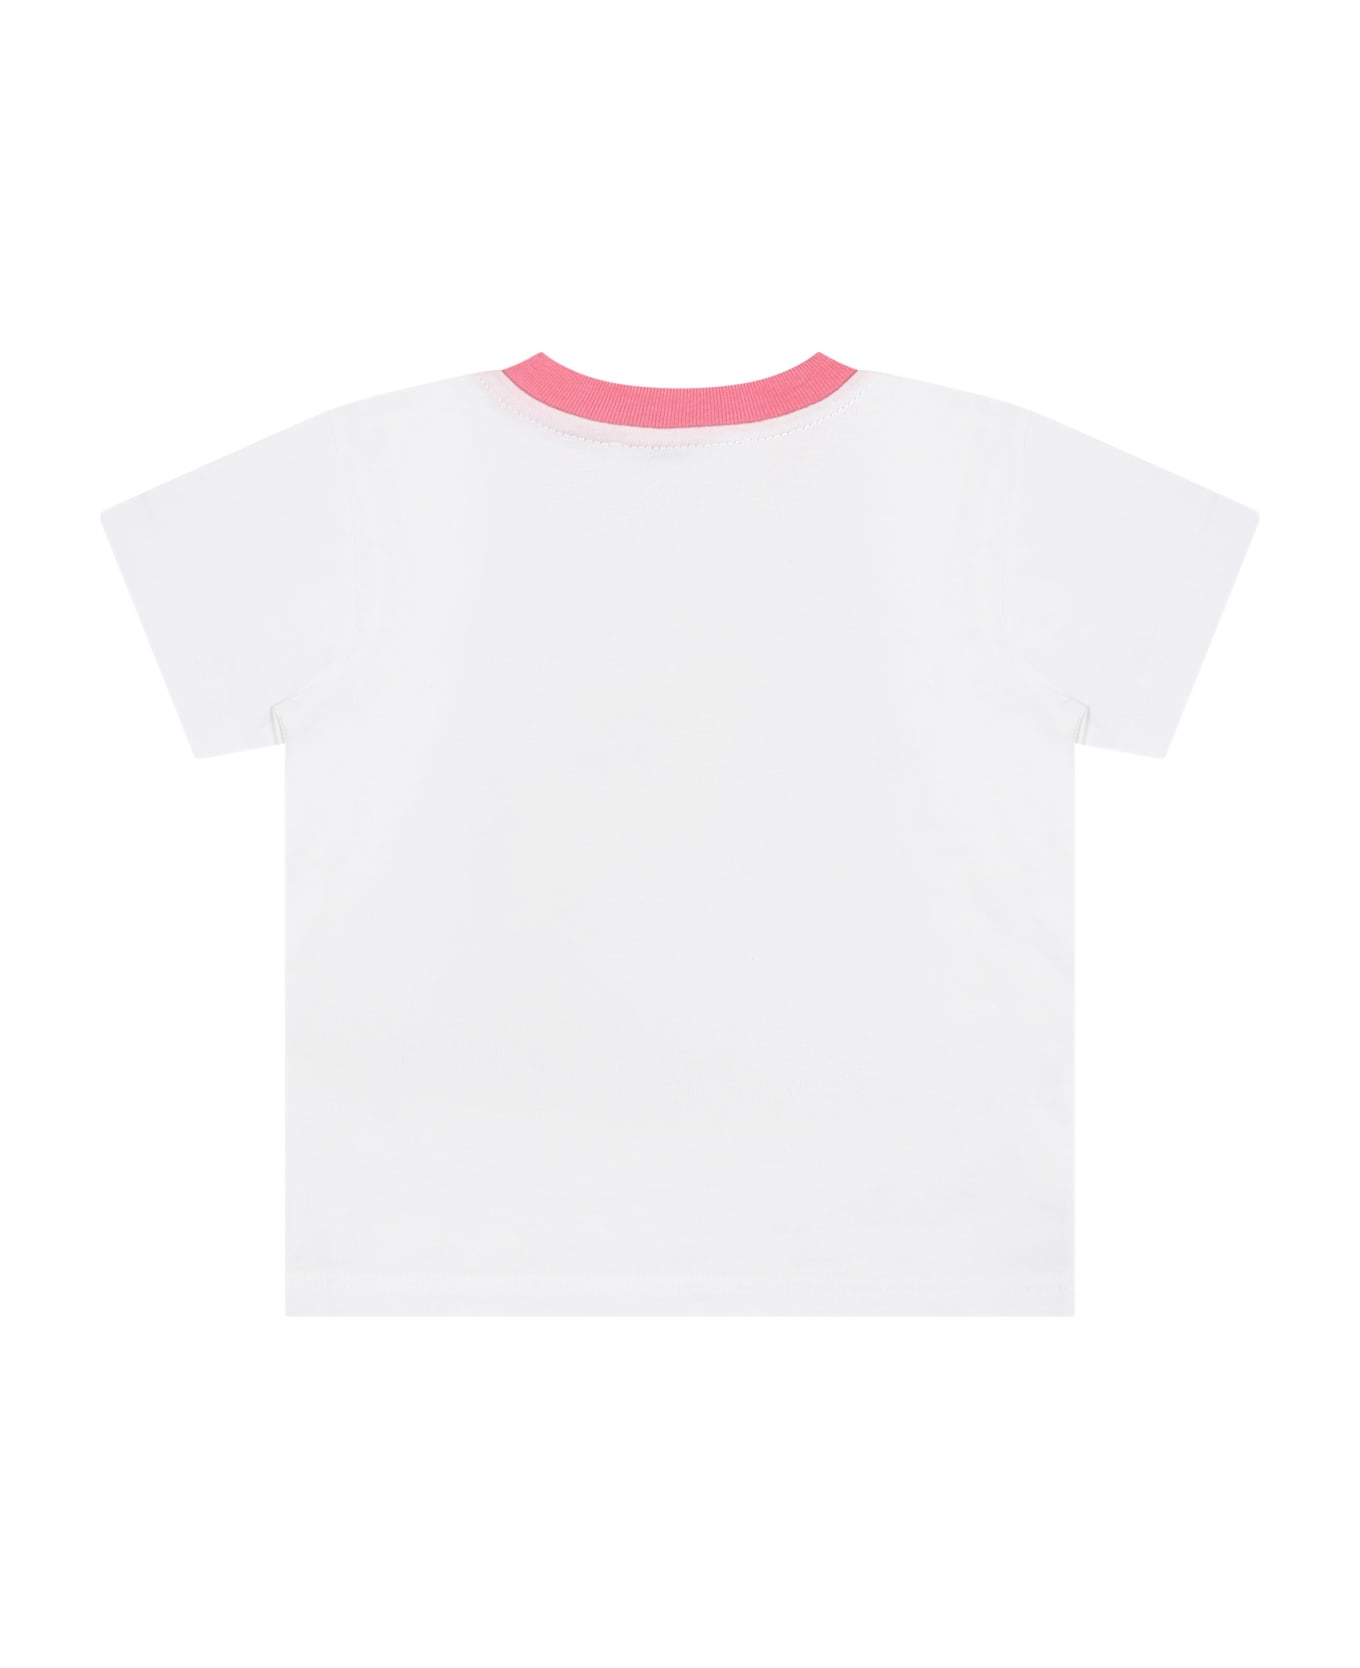 Dolce & Gabbana White T-shirt For Baby Girl With Multicolor Print - White